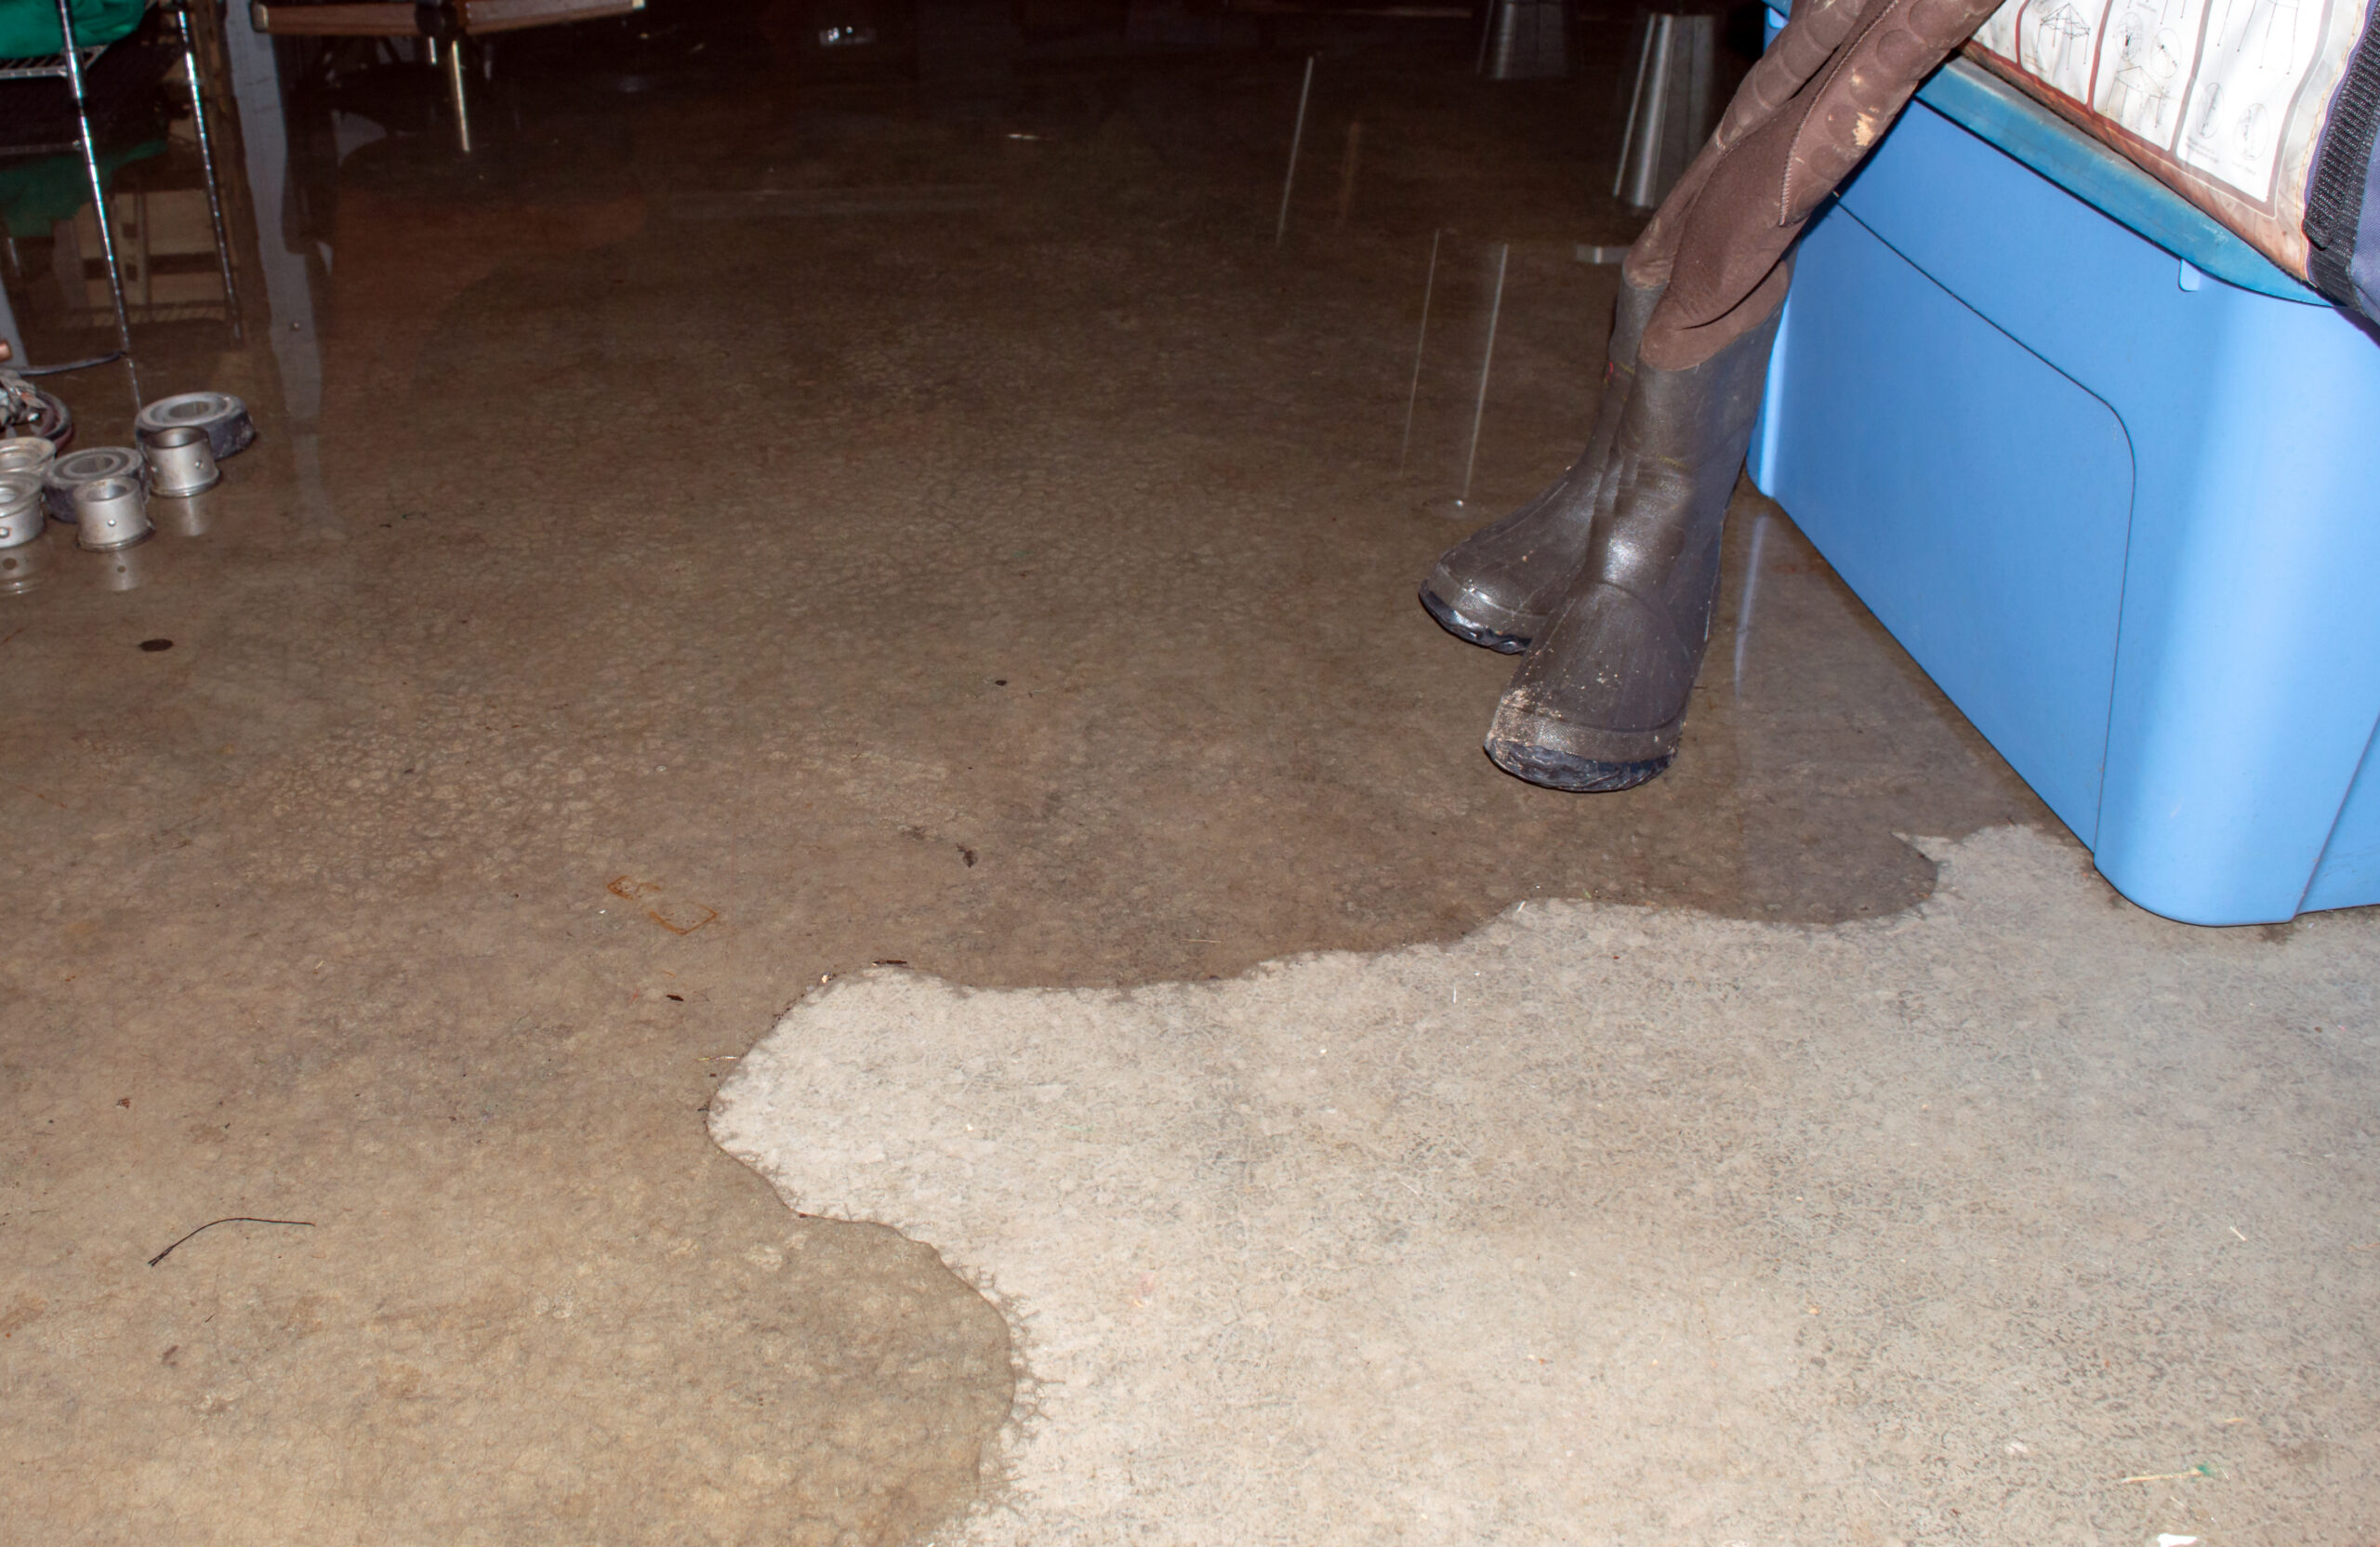 A pair of hip boots stand ready as the basement begins to flood and rains continue to pour down relentlessly. 